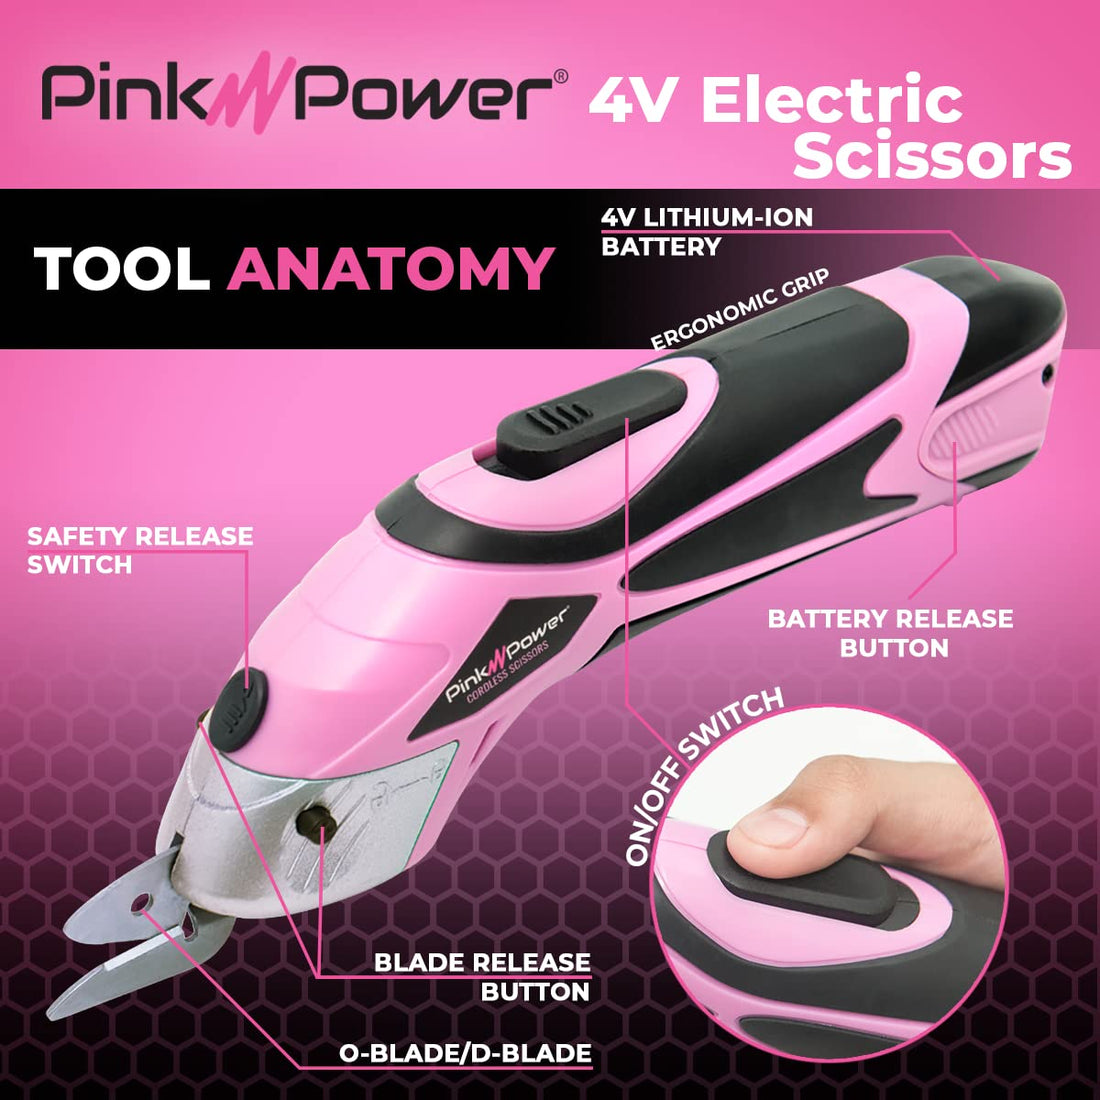 Pink Power PP361LI Lithium Ion Cordless Electric Scissors for Crafts, Fabric and Scrapbooking - Set of 1